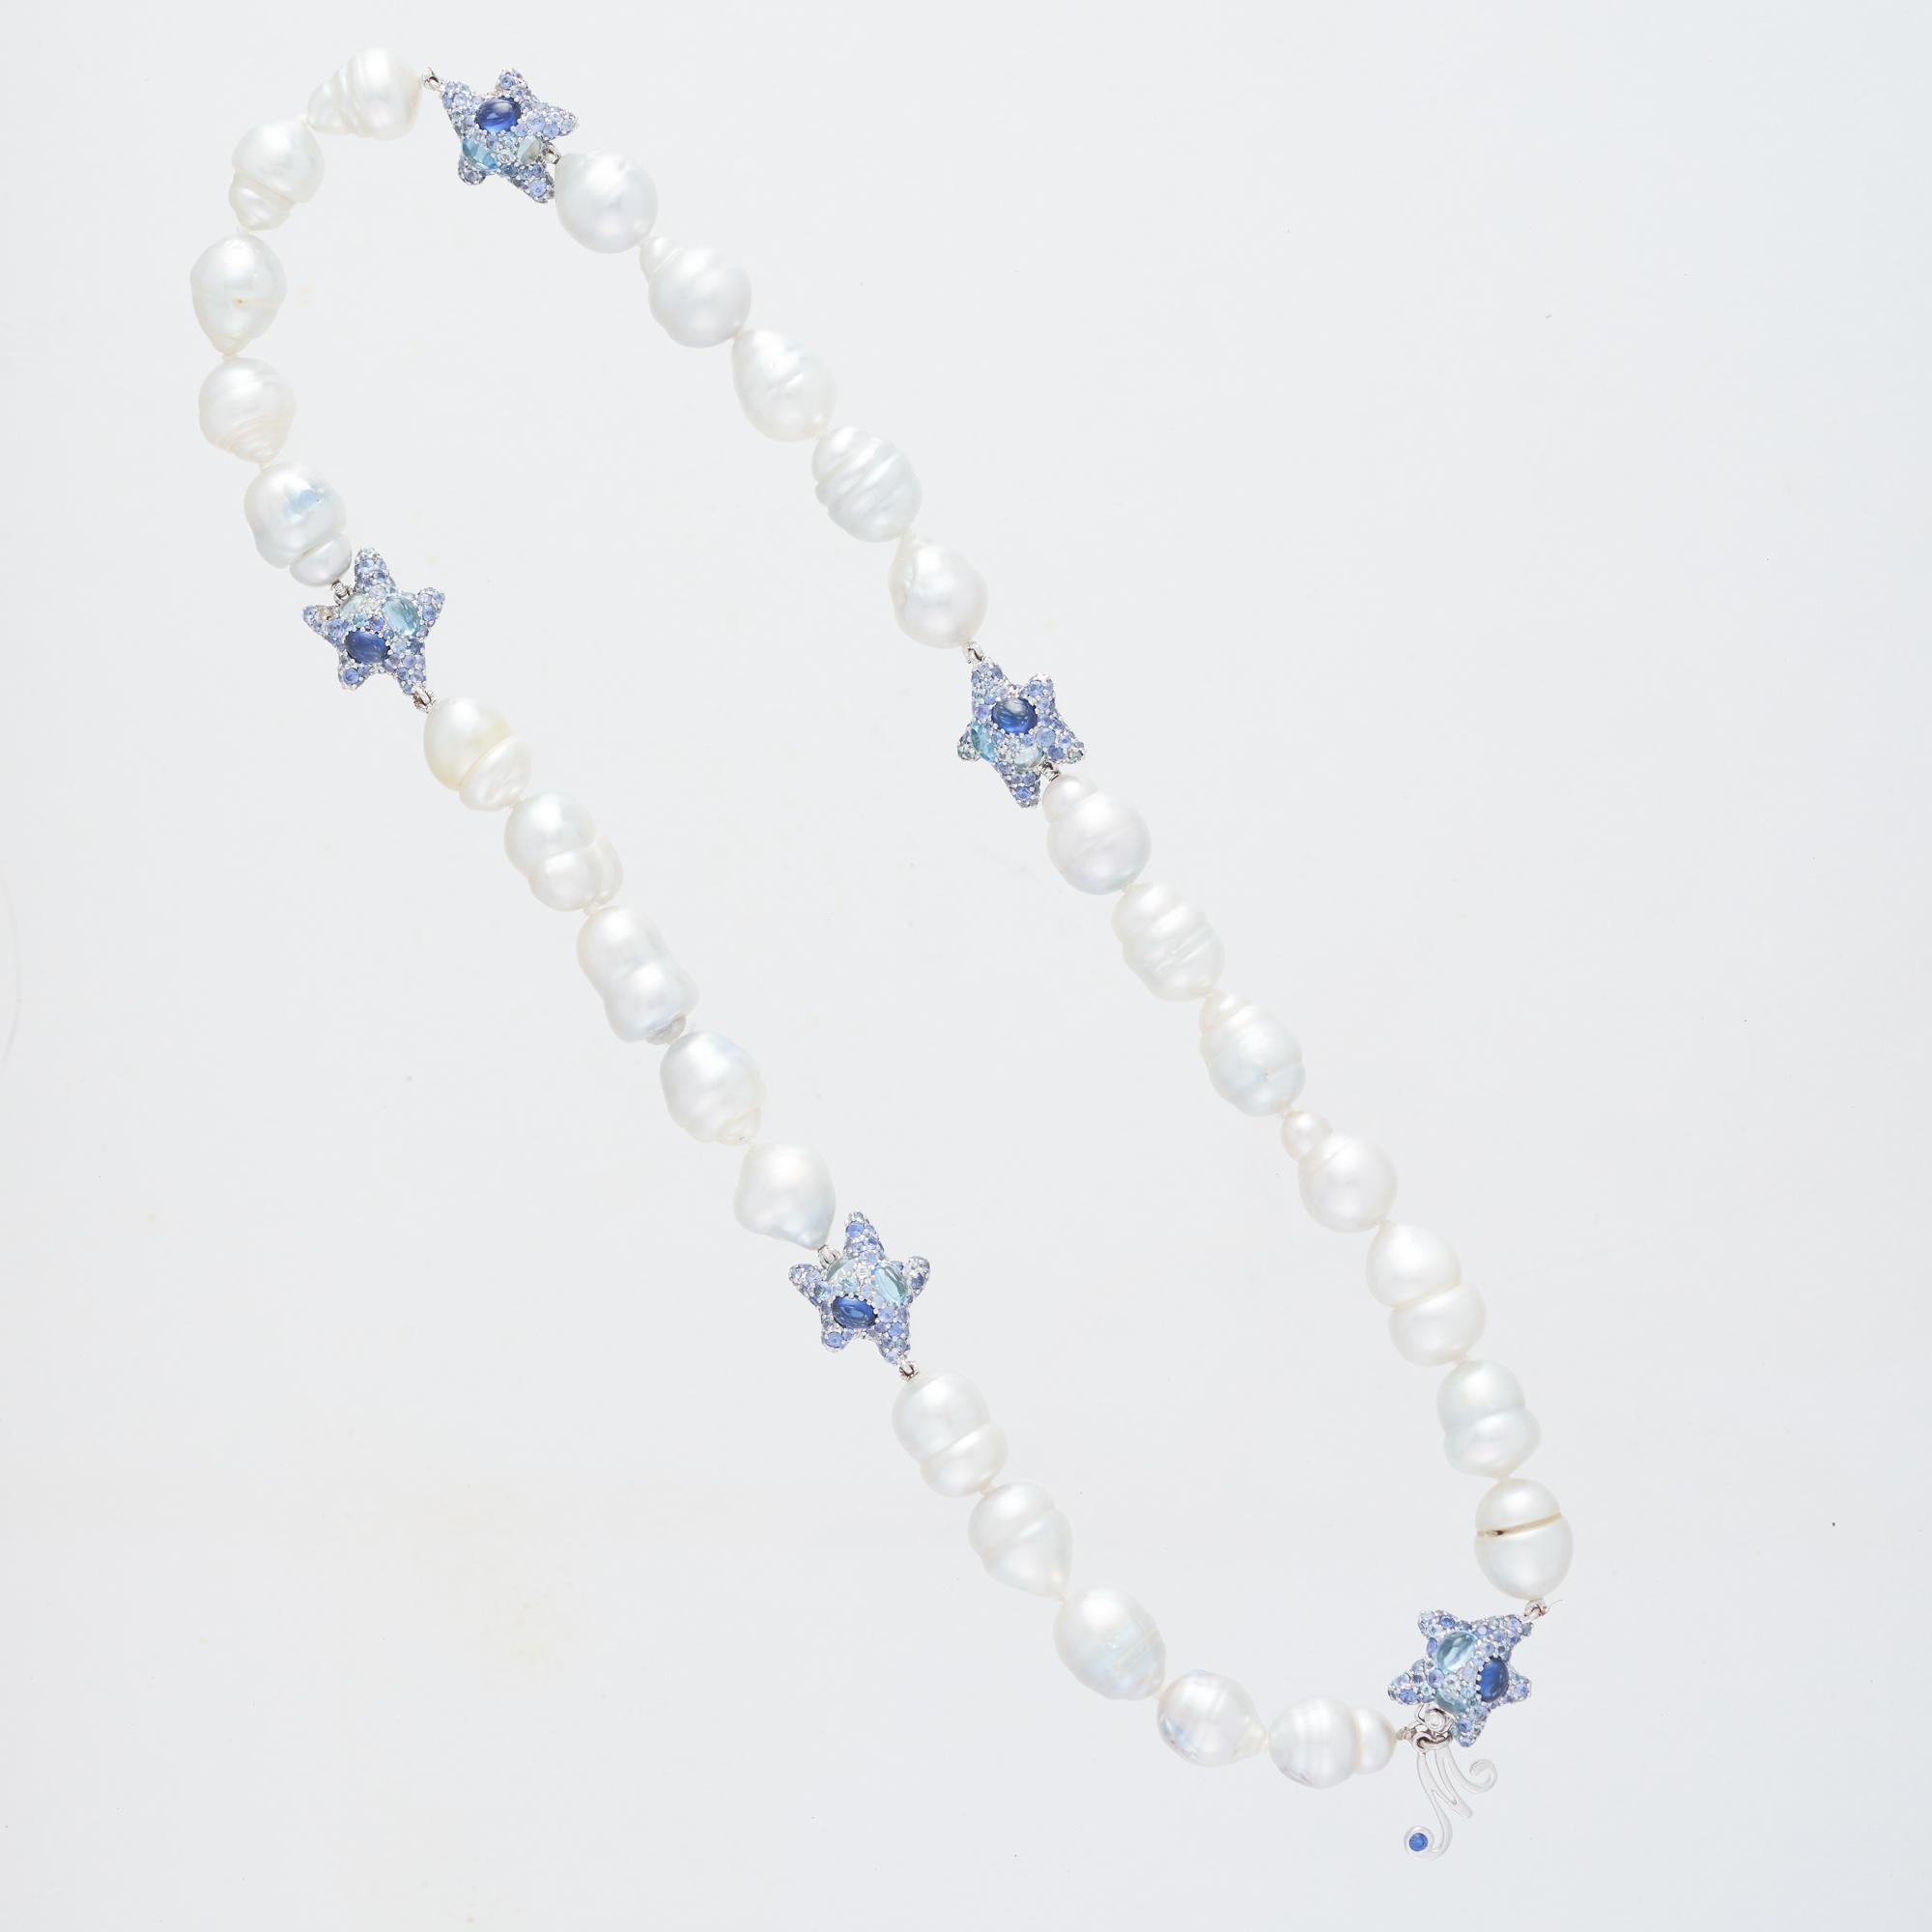 Margot McKinney South Sea Pearl 10-11 mm (27 pearls) Necklet with a suite of Starfish Enhancers set in total with 2 Diamonds 0.04 carat, 528 Sapphires 10.32 carat, 50 Blue Topaz 1.12 carat, 10 oval Sapphires 3.91 carat and 5 oval Blue Topaz in